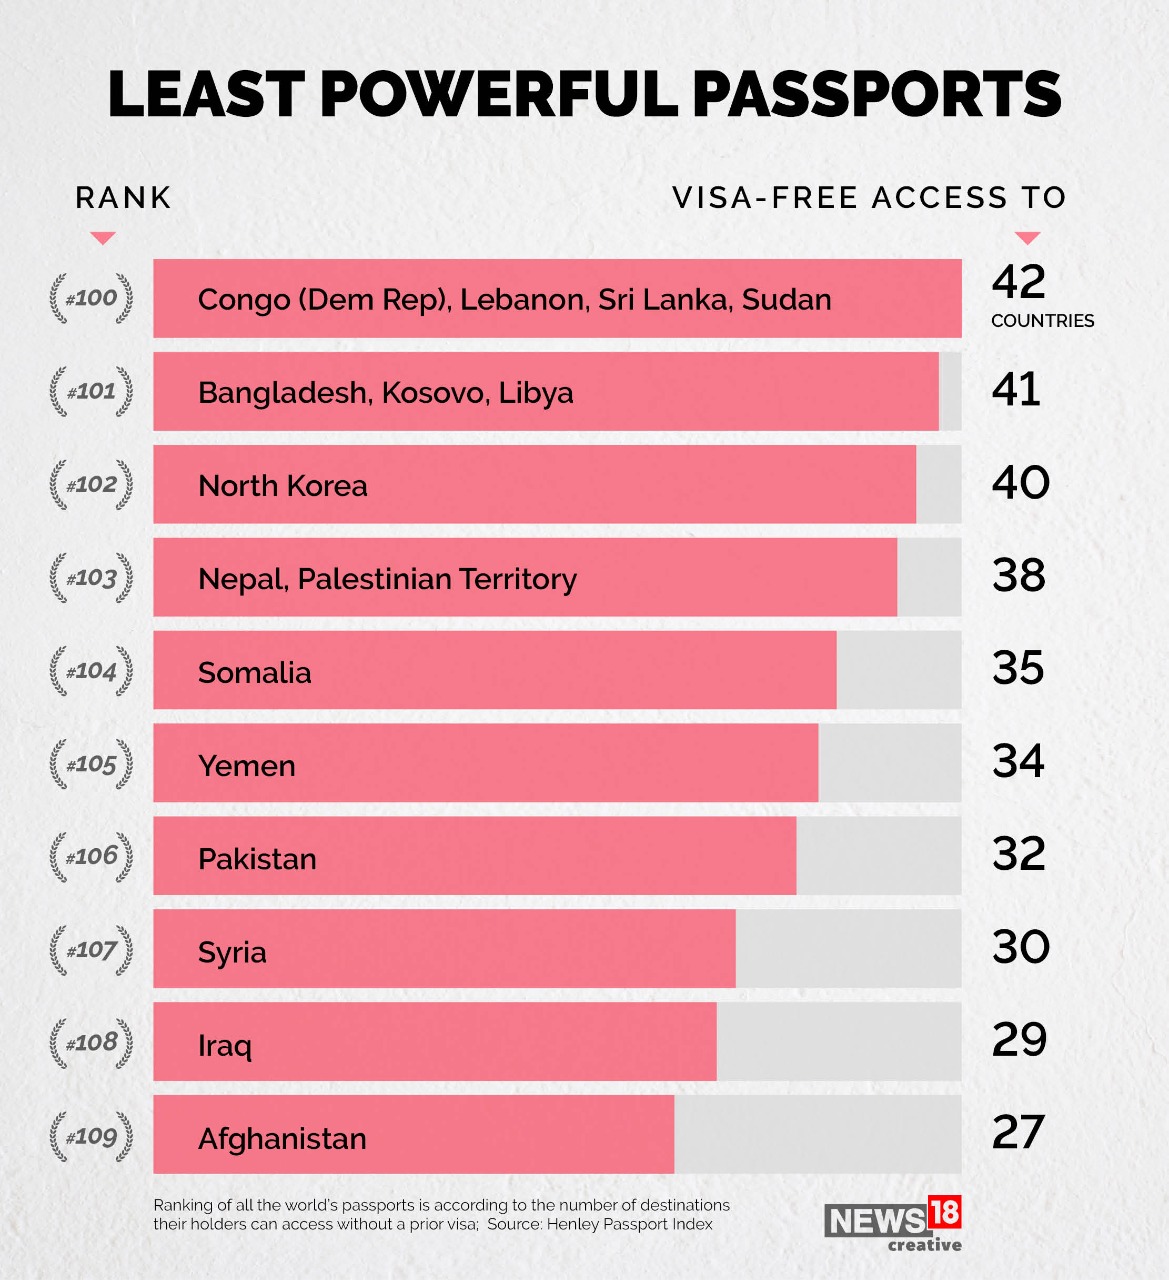 World's Most Powerful Passports: Three Asian Countries at Top Positions, Find Out India's Rank | In GFX